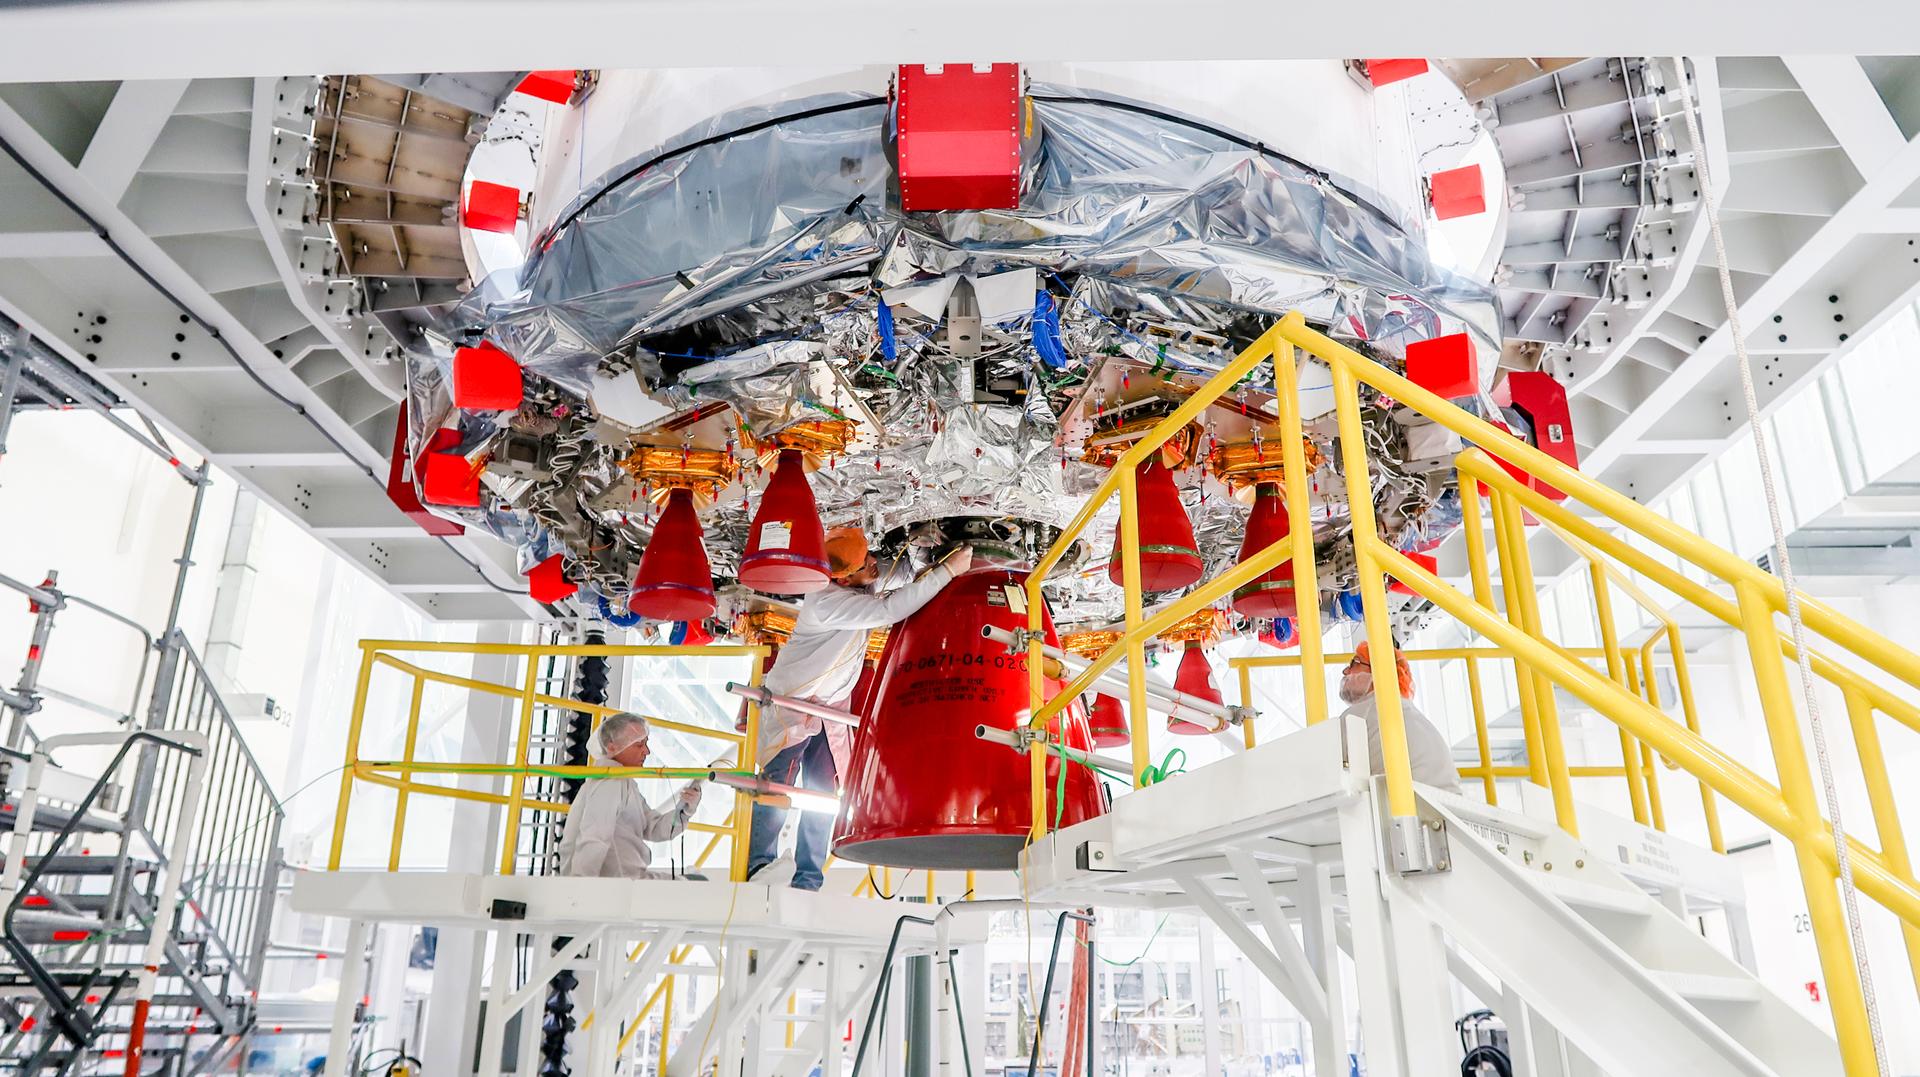 Technicians at NASA’s Kennedy Space Center in Florida finish installing the orbital maneuvering system engine nozzle and heat shield for the Artemis II European Service Module inside the Ou0026amp;C Building on Jan. 16, 2023. 